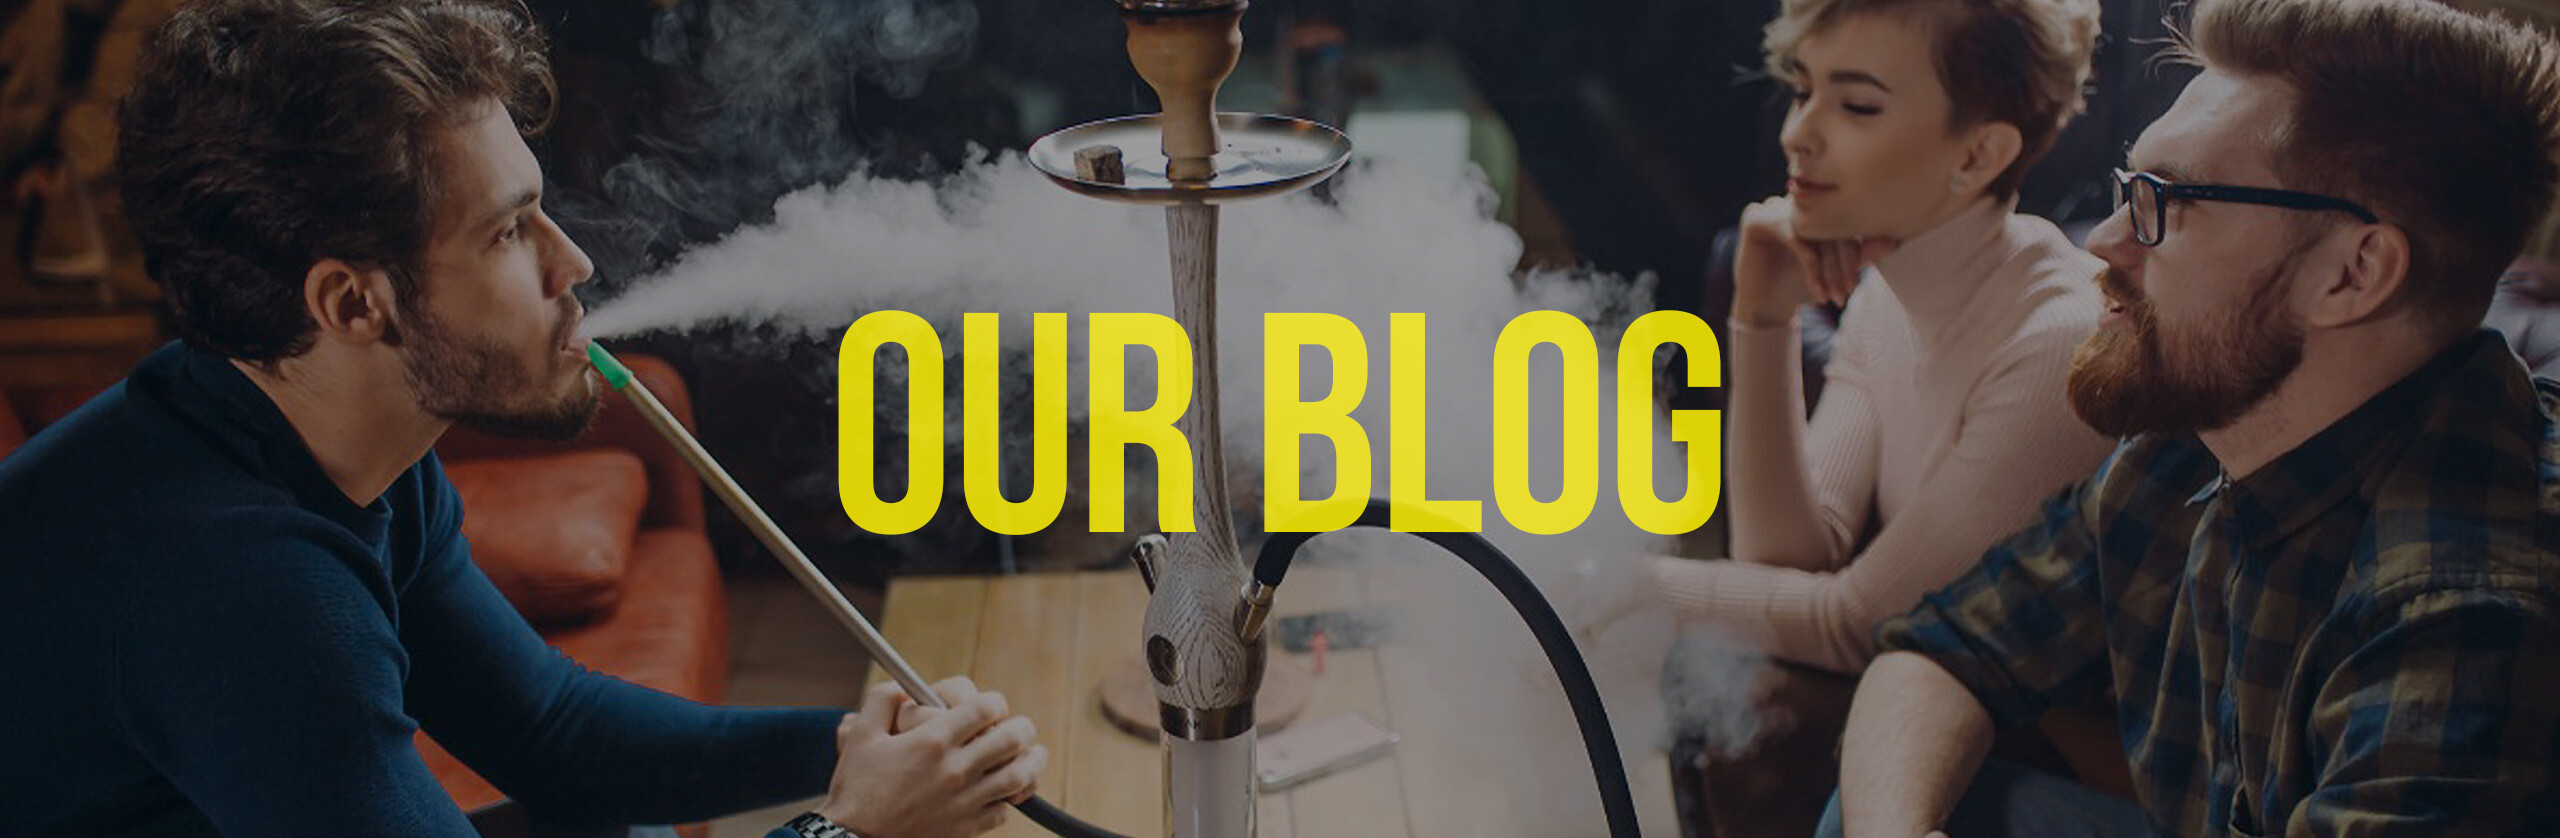 Do the best things that make your hookah session awesome!